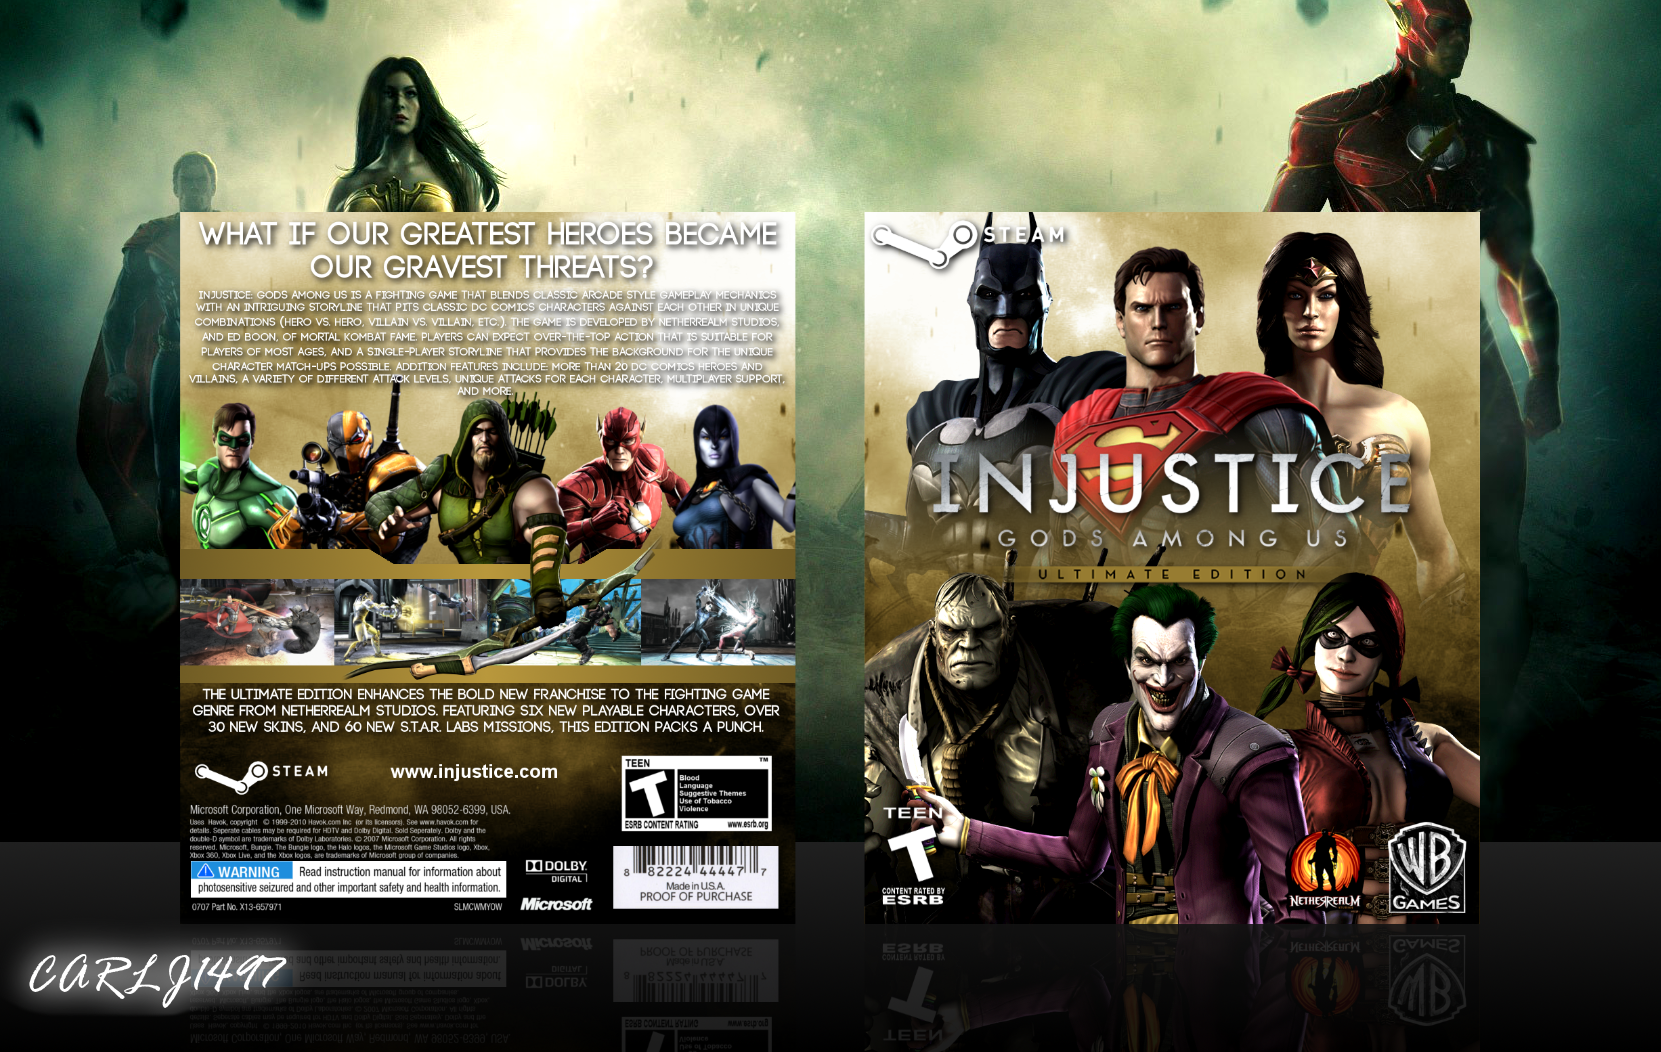 Injustice Gods Among Us: Ultimate Edition box cover